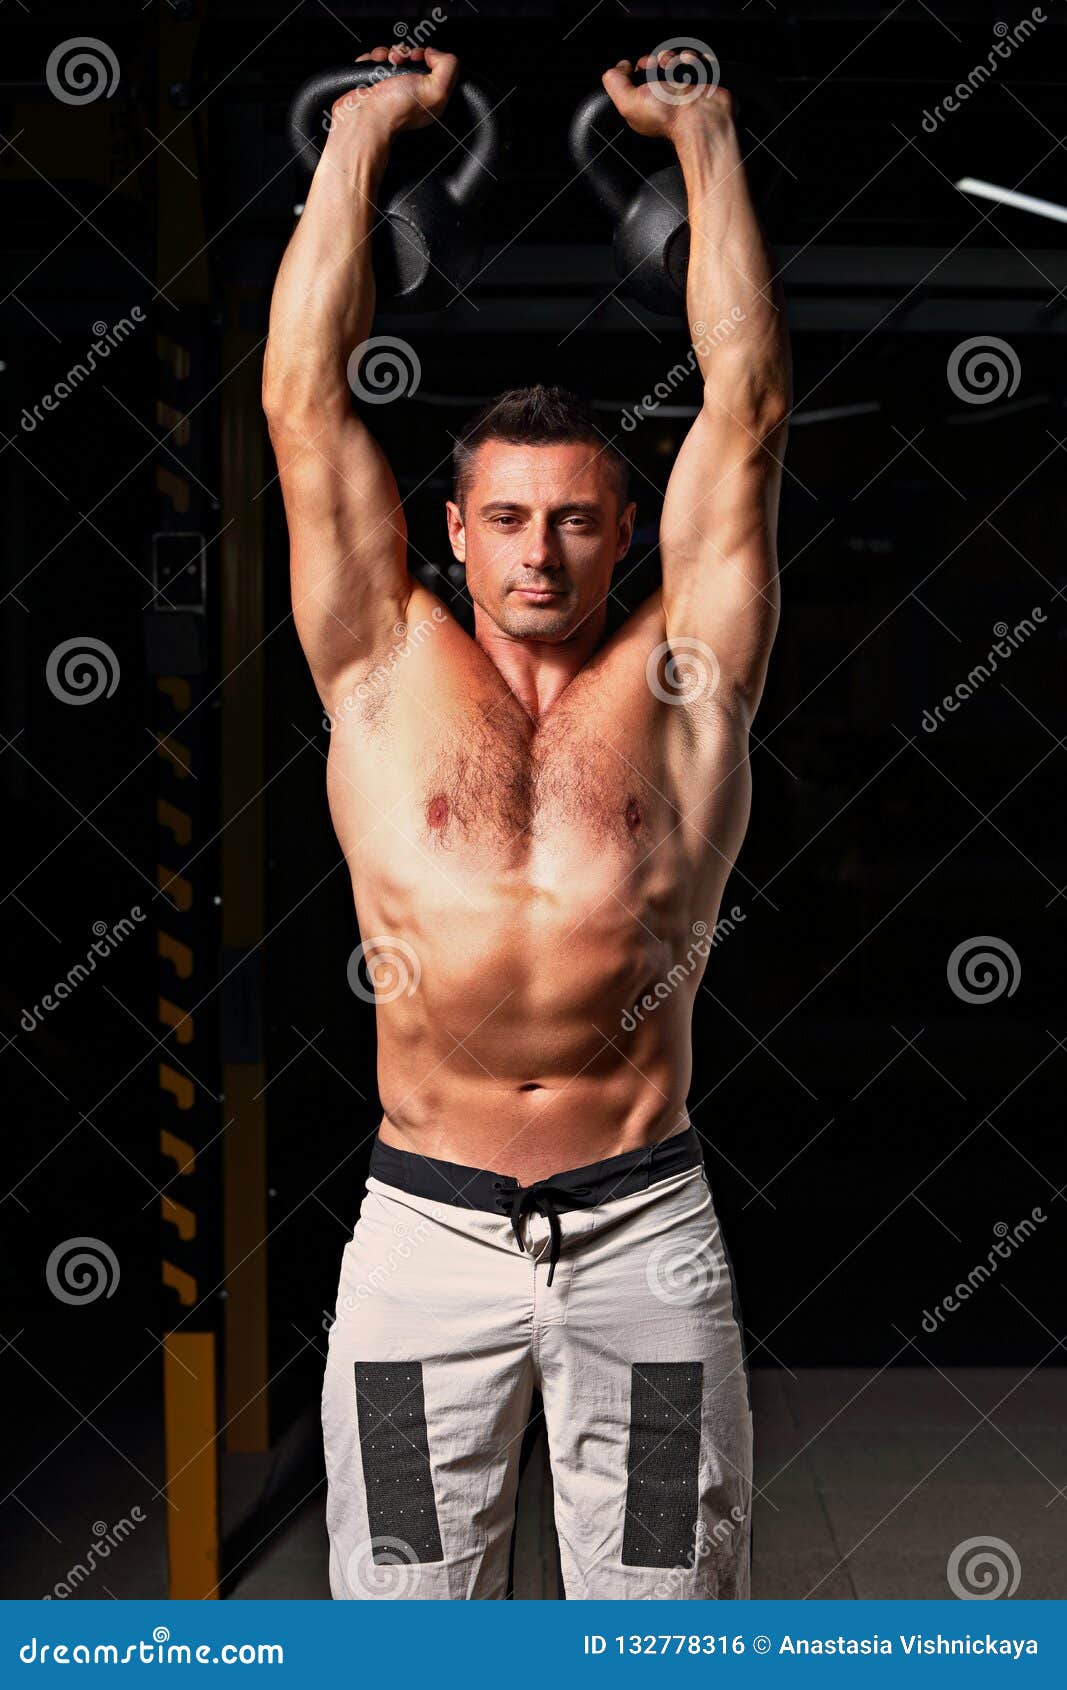 handsome strong man doing the exercises with kettlebells in sportwear shorts on dark shadow background. closeup bright portrait.